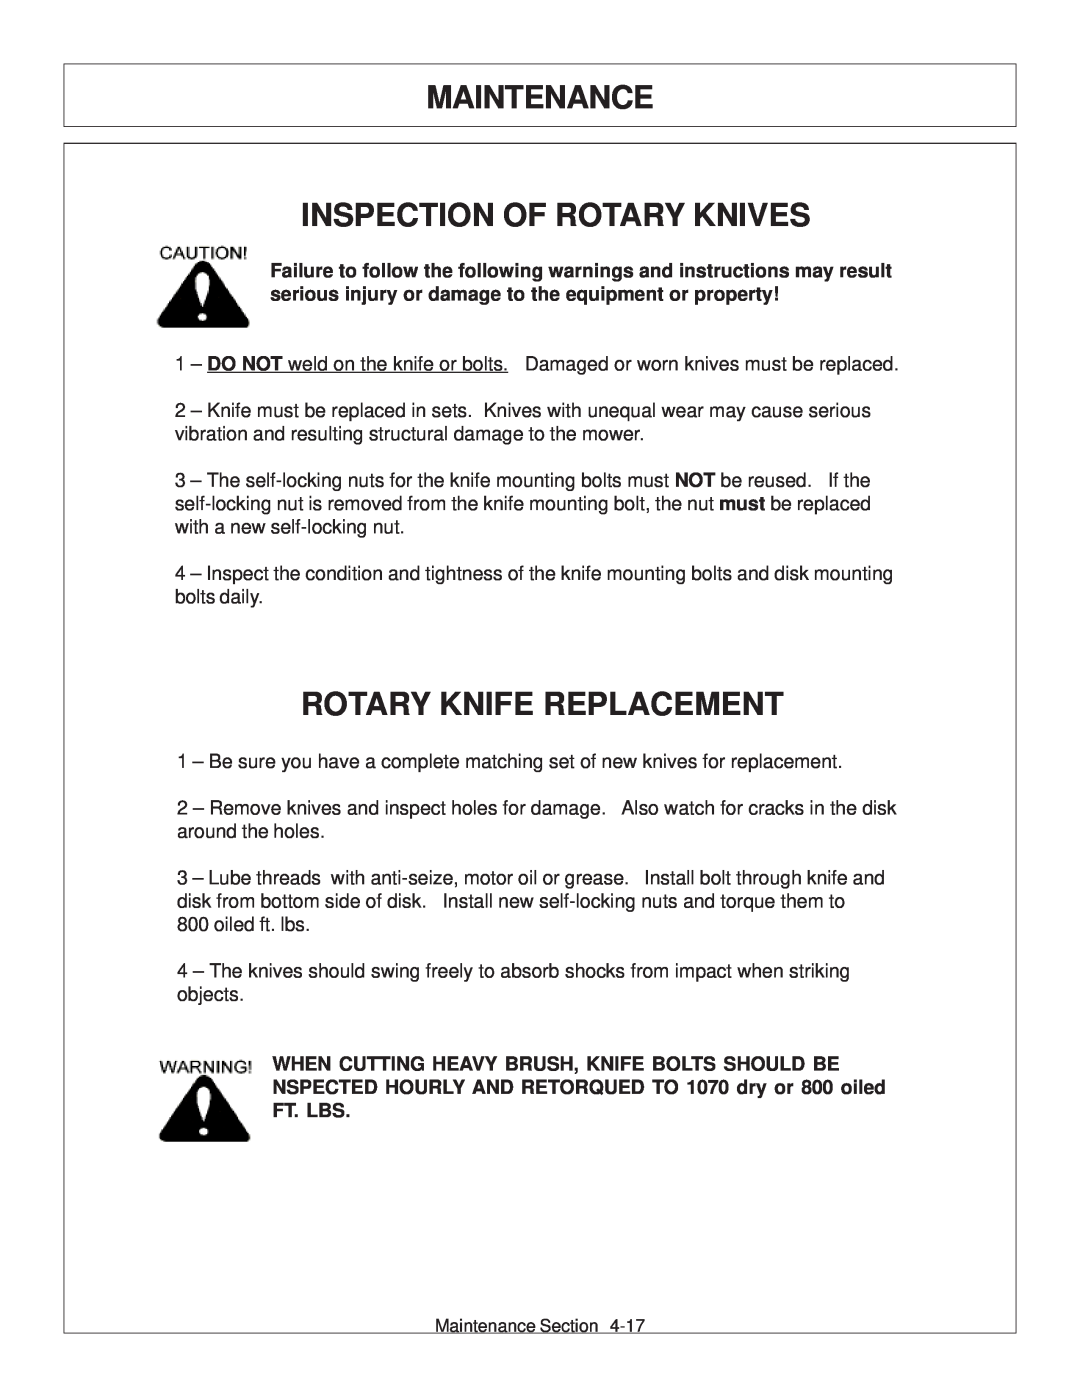 Tiger Products Co., Ltd JD 72-7520 manual Inspection Of Rotary Knives, Rotary Knife Replacement, Maintenance 